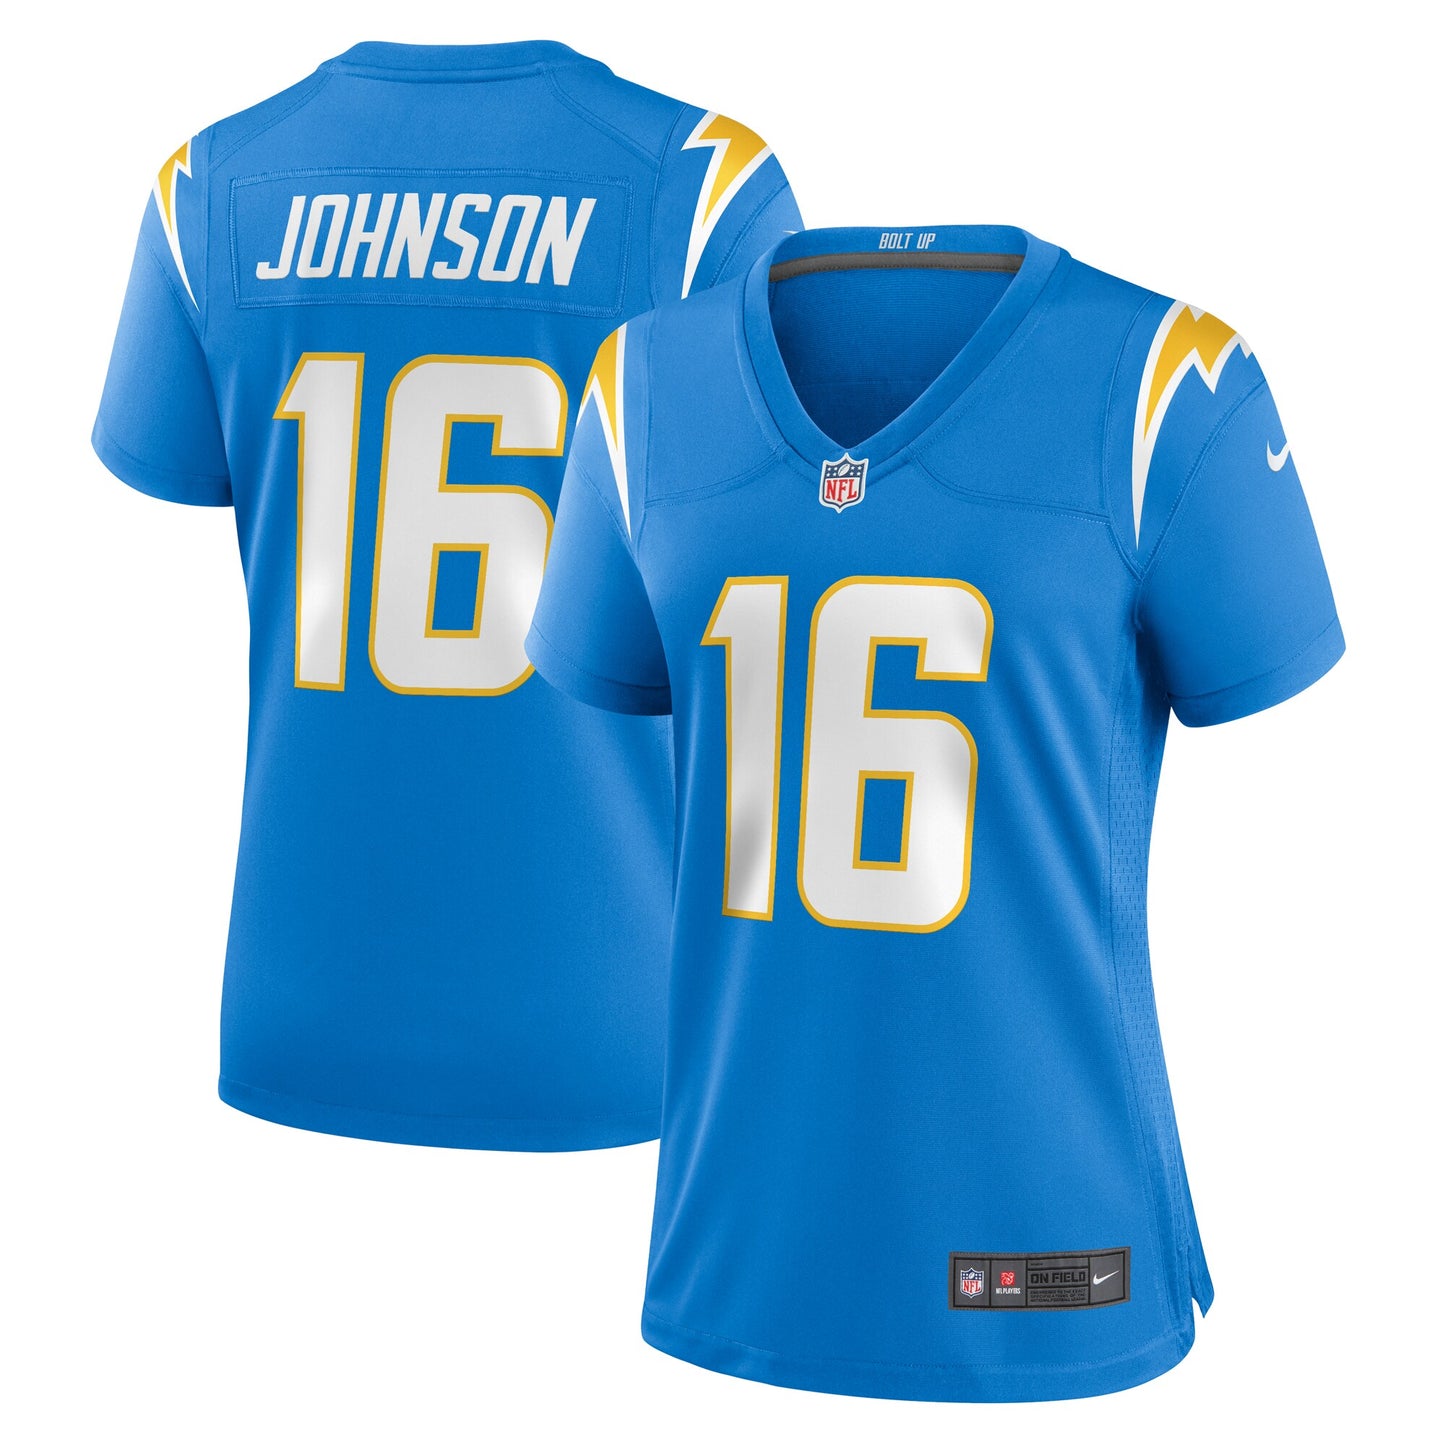 Tyler Johnson Los Angeles Chargers Nike Women's Team Game Jersey -  Powder Blue